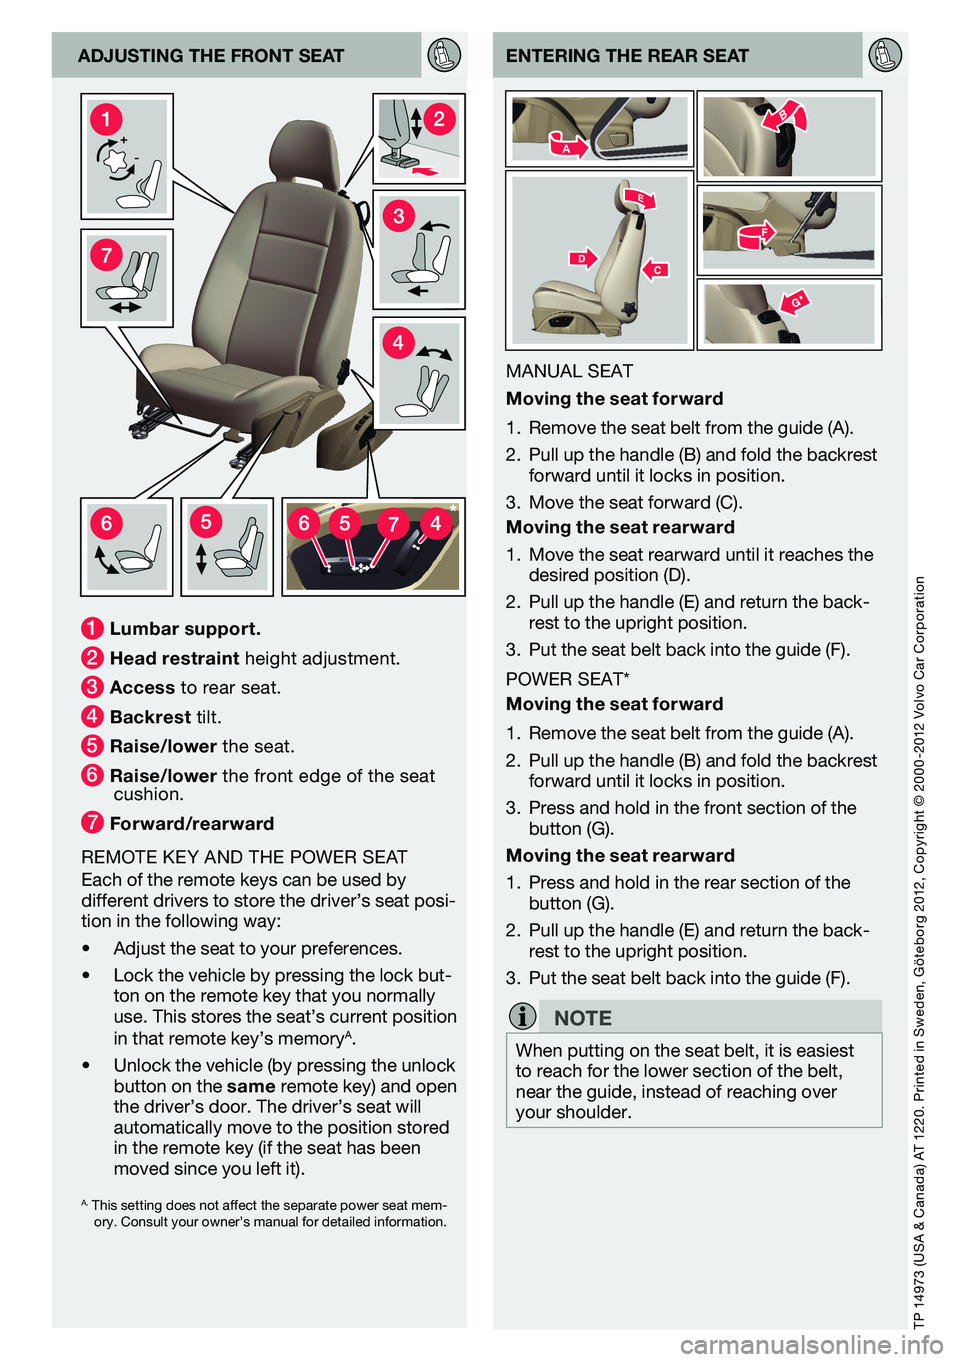 VOLVO C70 2013  Quick Guide tP 14973 (U sa & Canada) at 1220. Printed in s weden, Göteborg 2012, Copyright © 2000-2012 Volvo Car Corporation  
enterIng the rear seat
MaNUal seat
m
oving the seat forward
1.  remove the seat bel